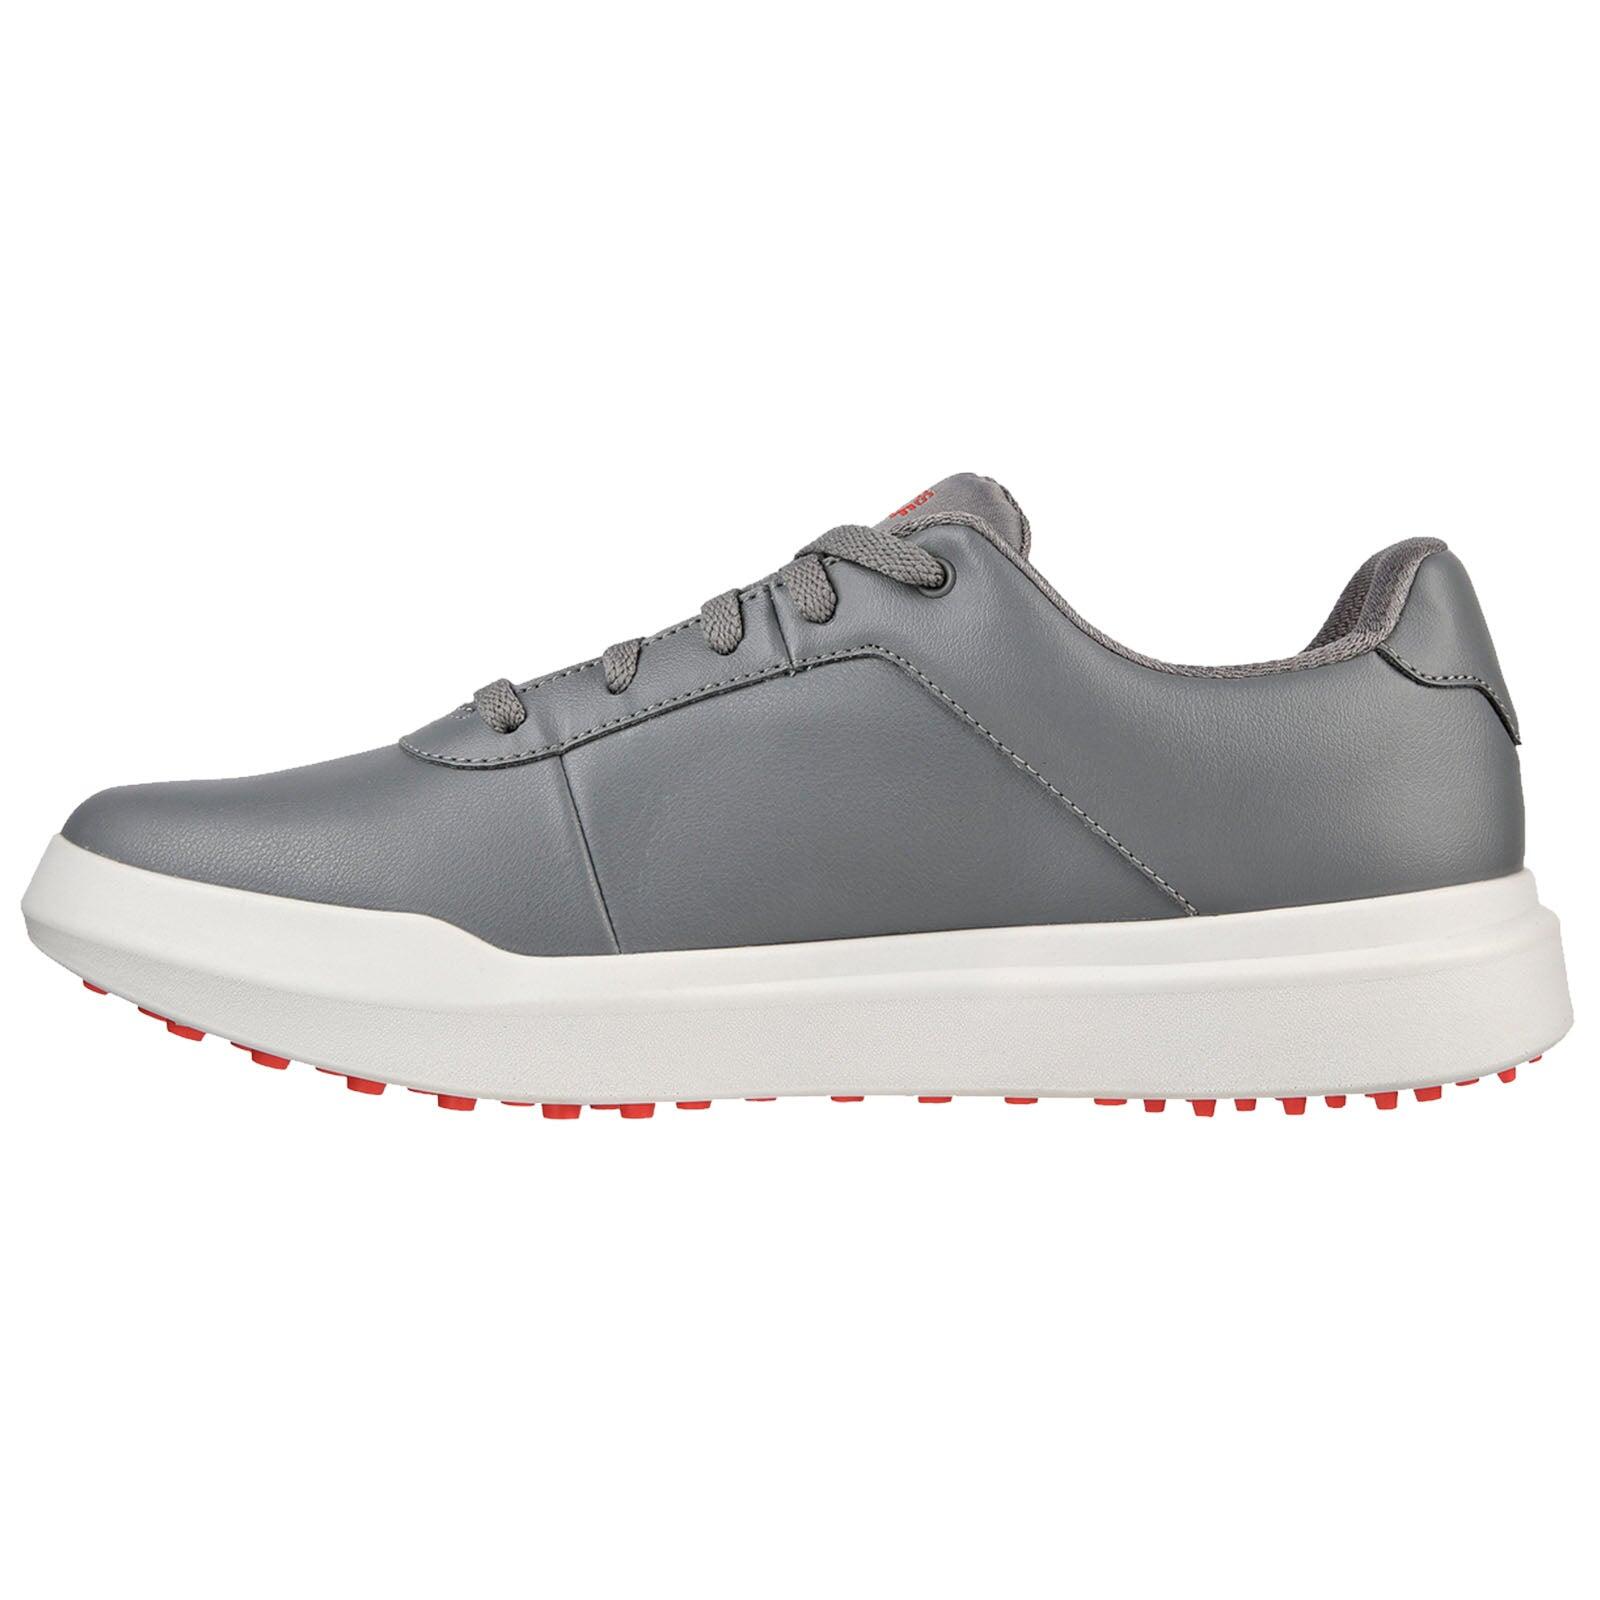 Skechers GO GOLF DRIVE 5 Golf Shoes - Grey/Red 7/7